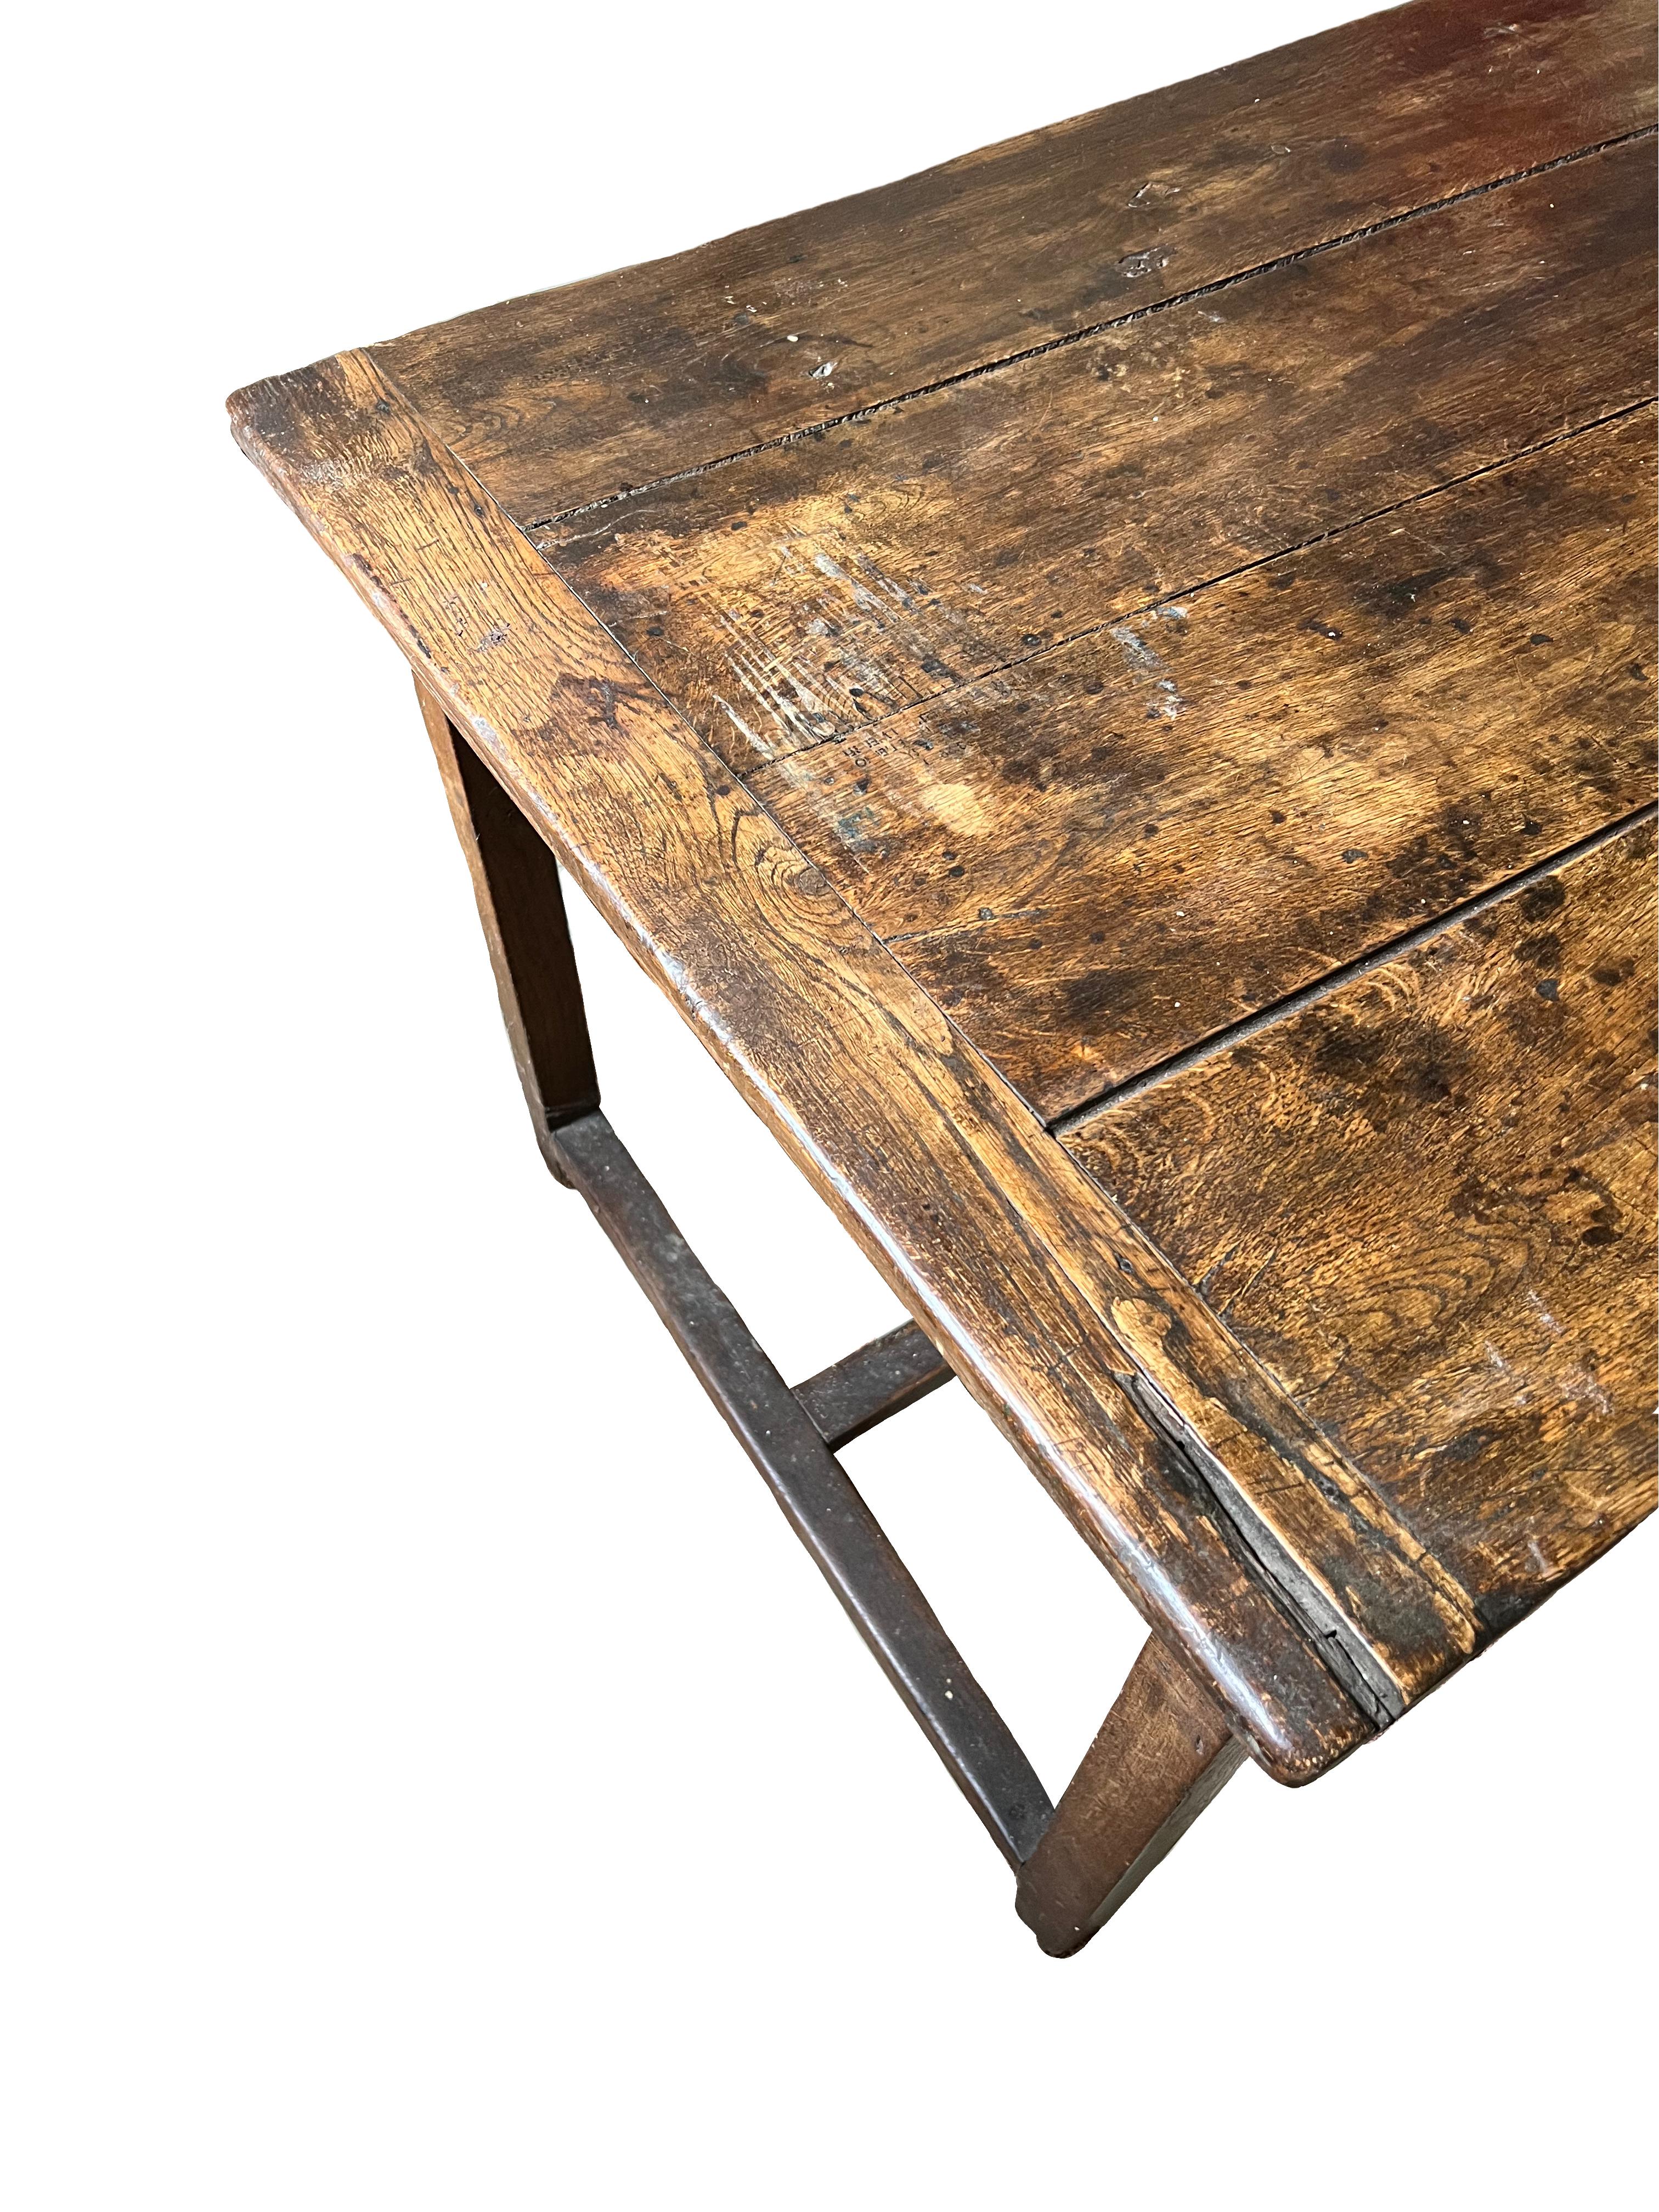 Rustic French 19th-century farmhouse table For Sale 4